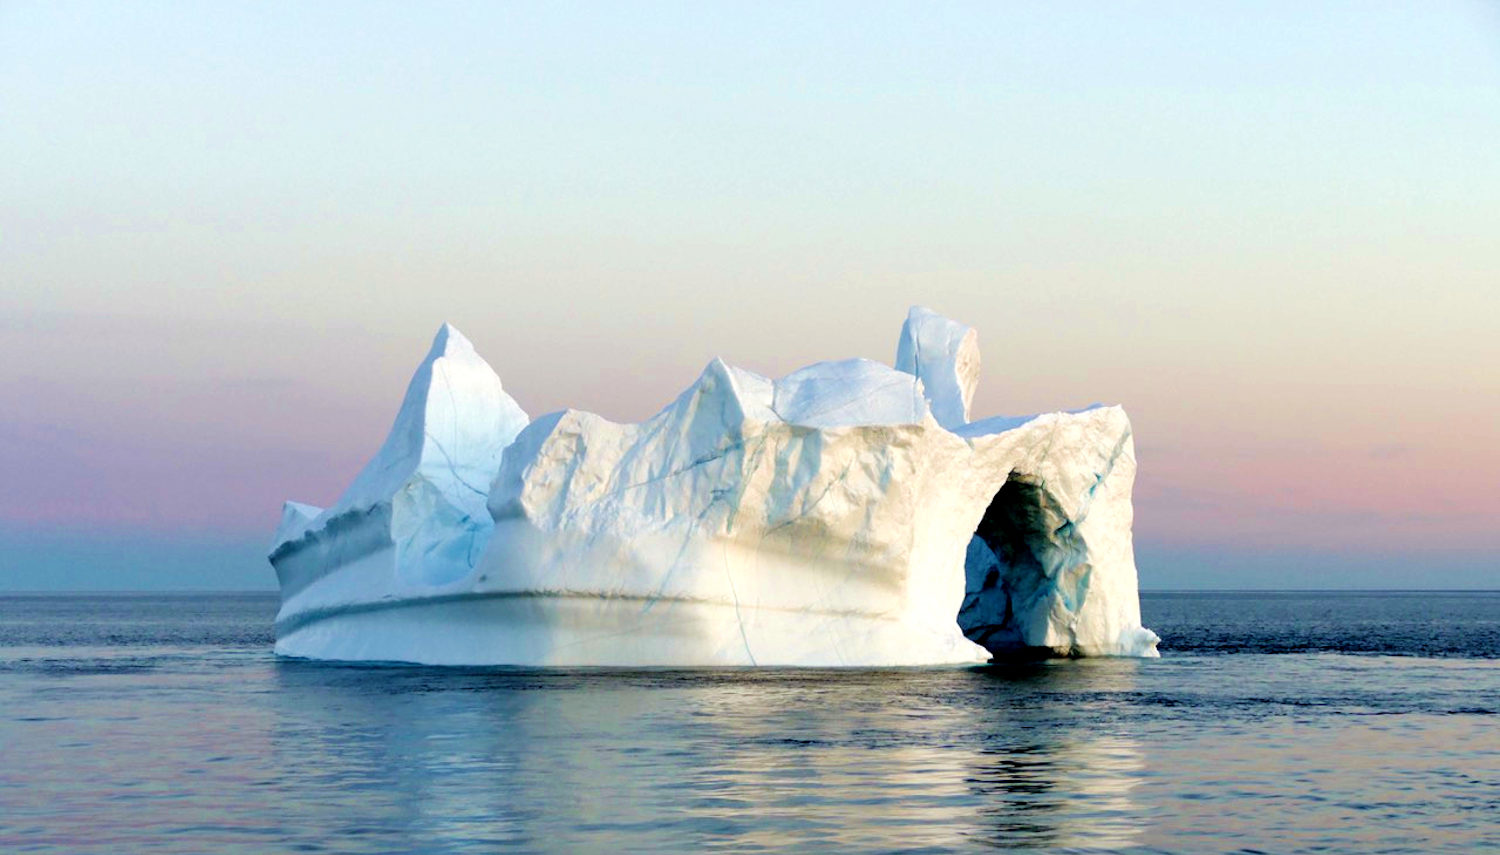 Vripack - Explorer Yacht Pioneer - Journey of a lifetime - Nature incredible Icebergs - Wildlife photography